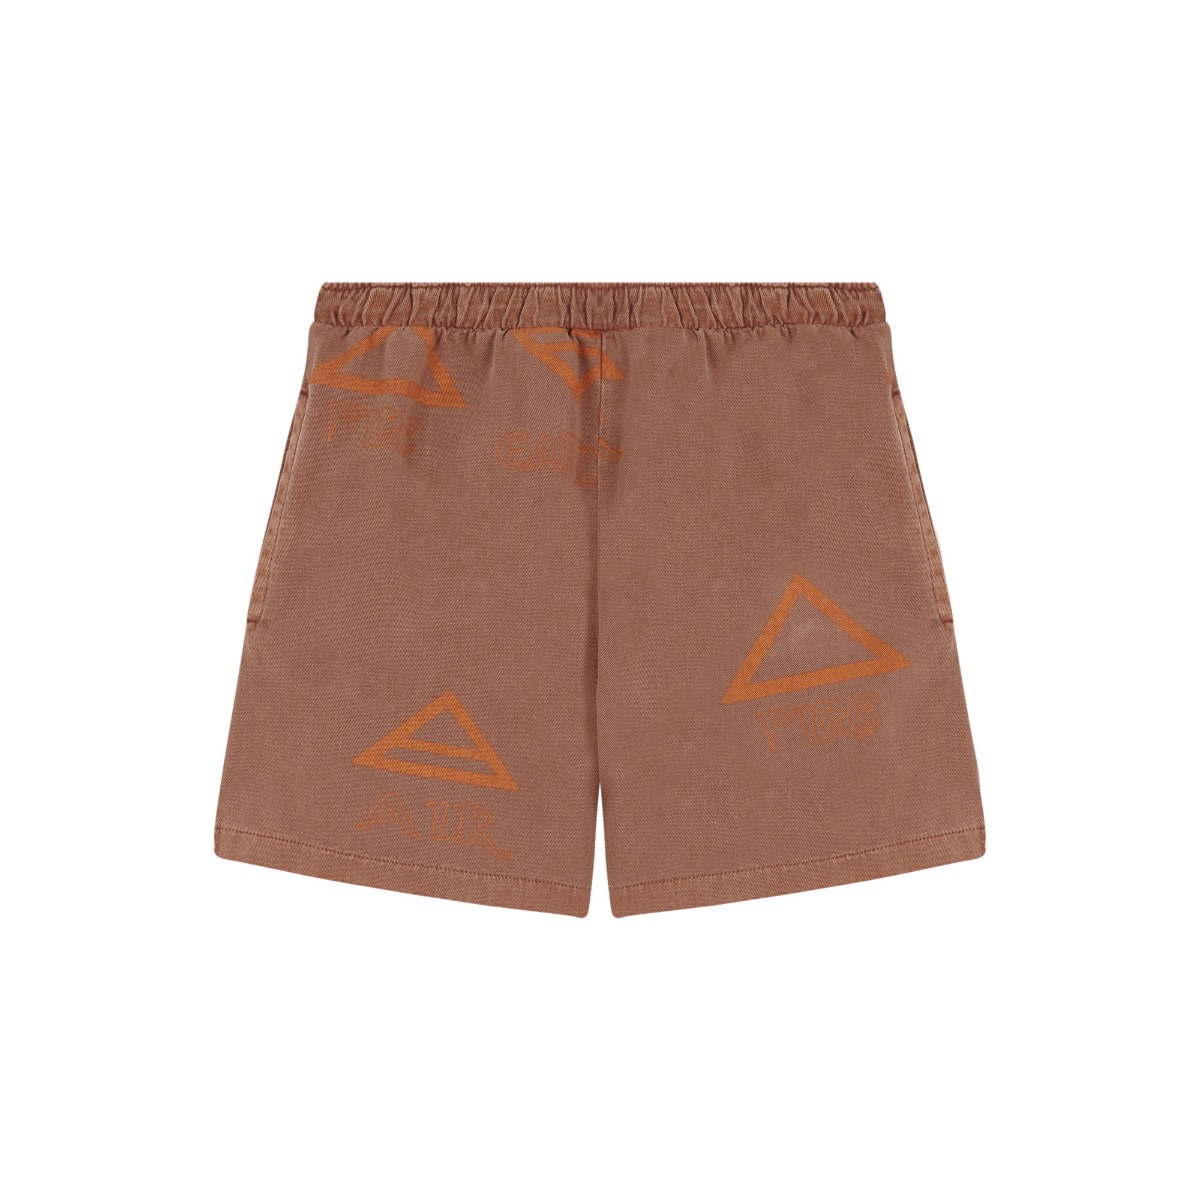 THE 4 ELEMENTS SHORTS